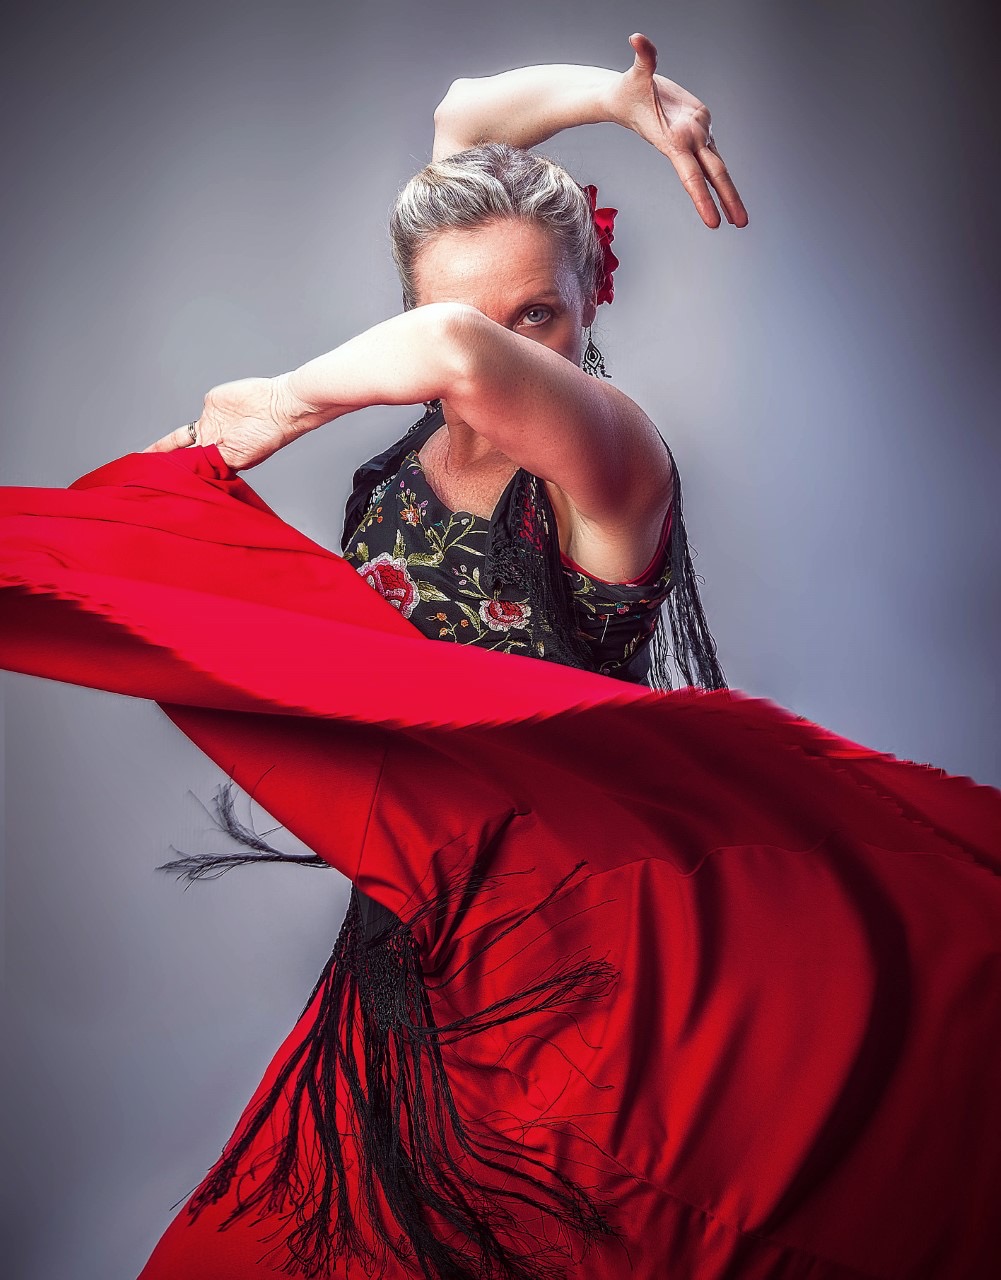 Dancer poses for headshot as she swings her dress over her face with arms in motion.